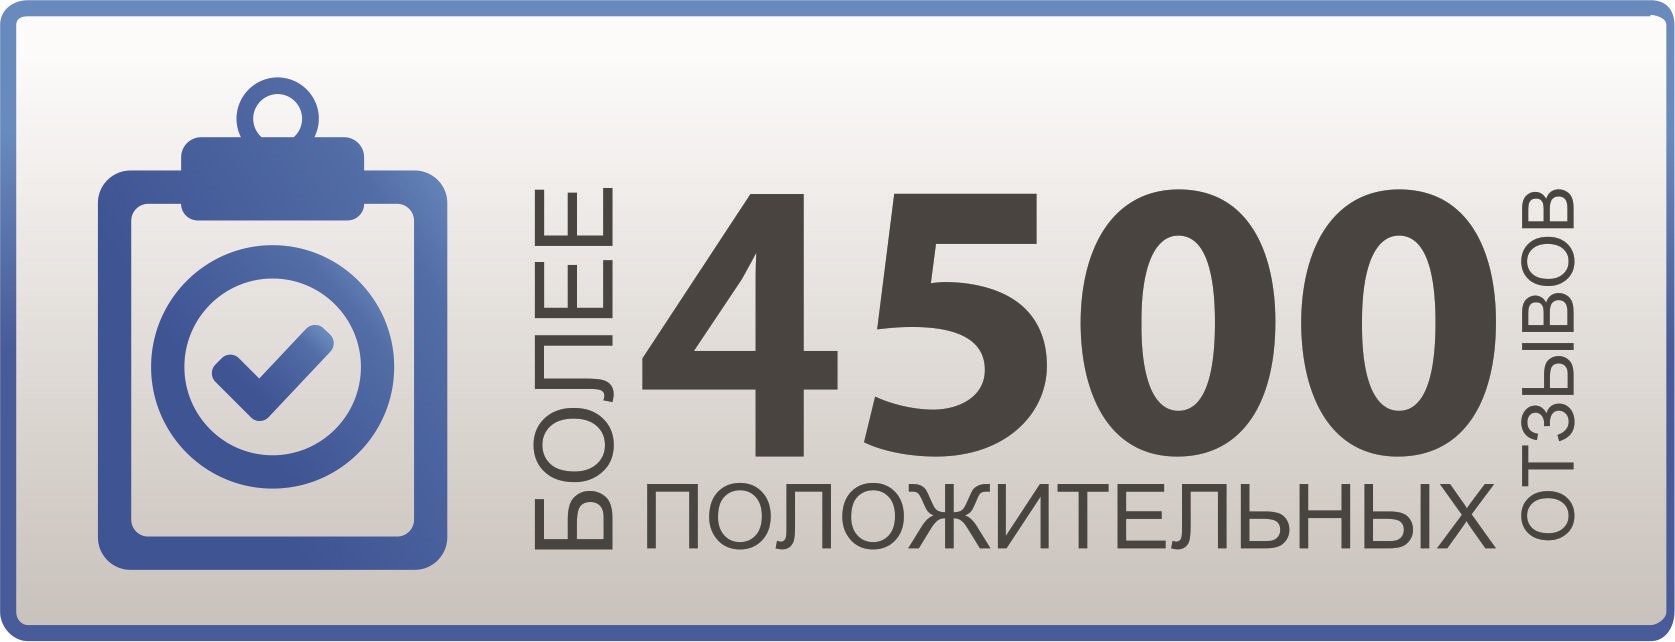 2500 rubles PSN PlayStation Network (RUS) + GIFT💳